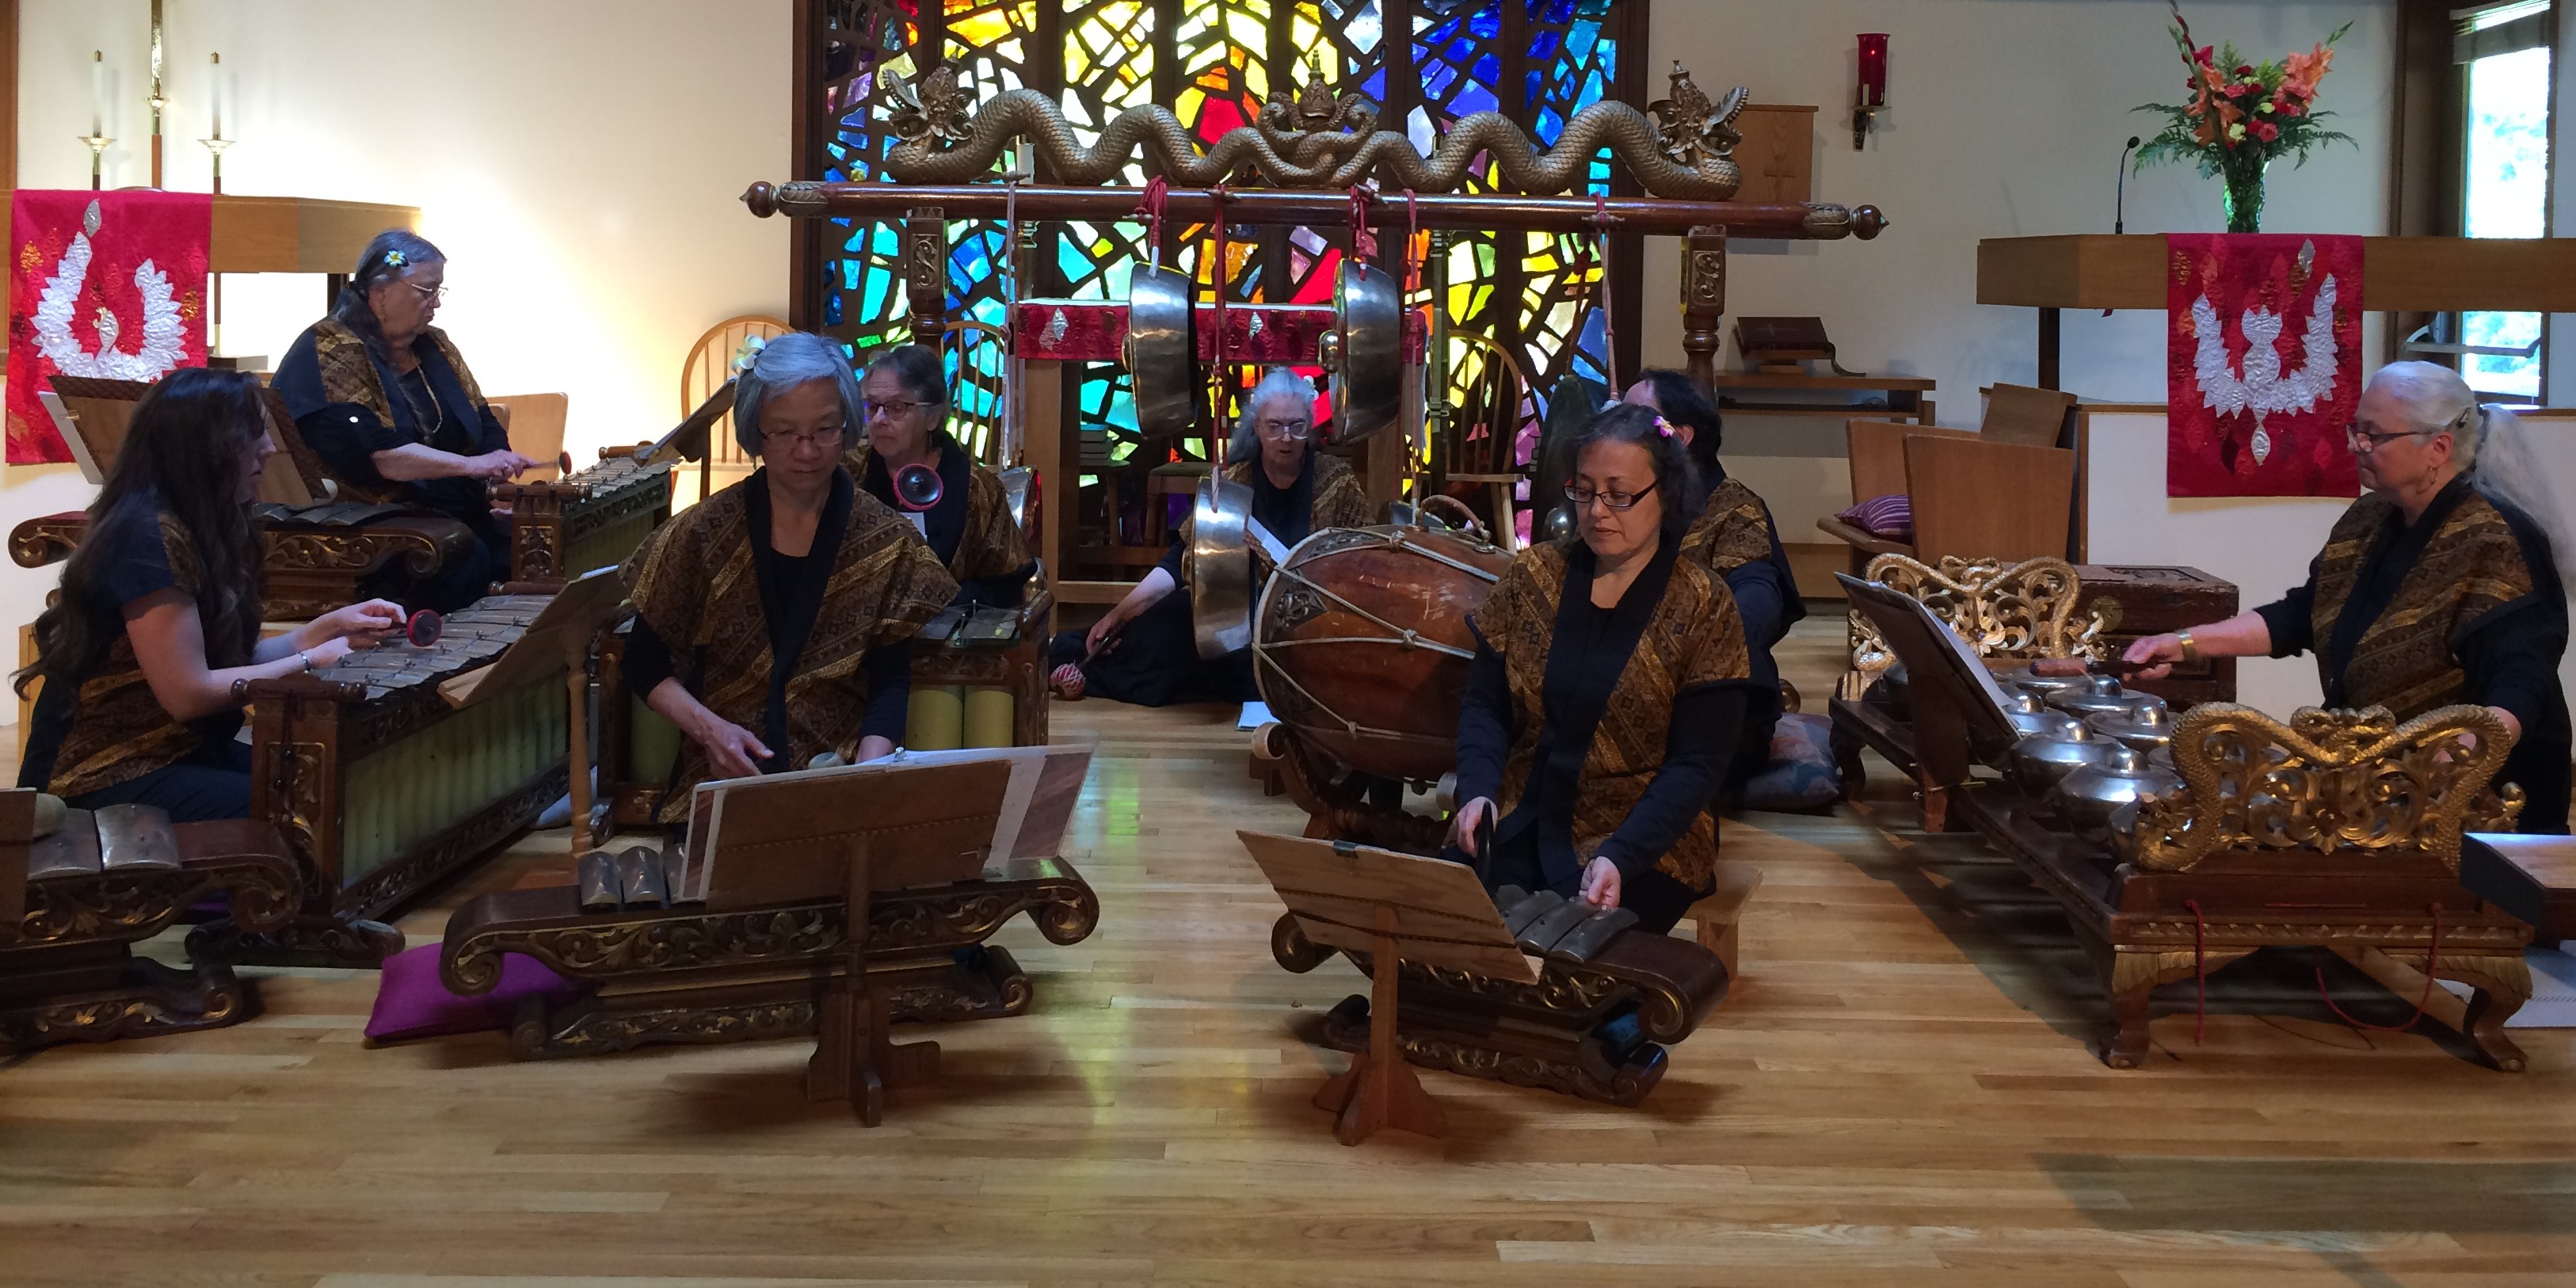 The ensemble performing live in front of stained glass